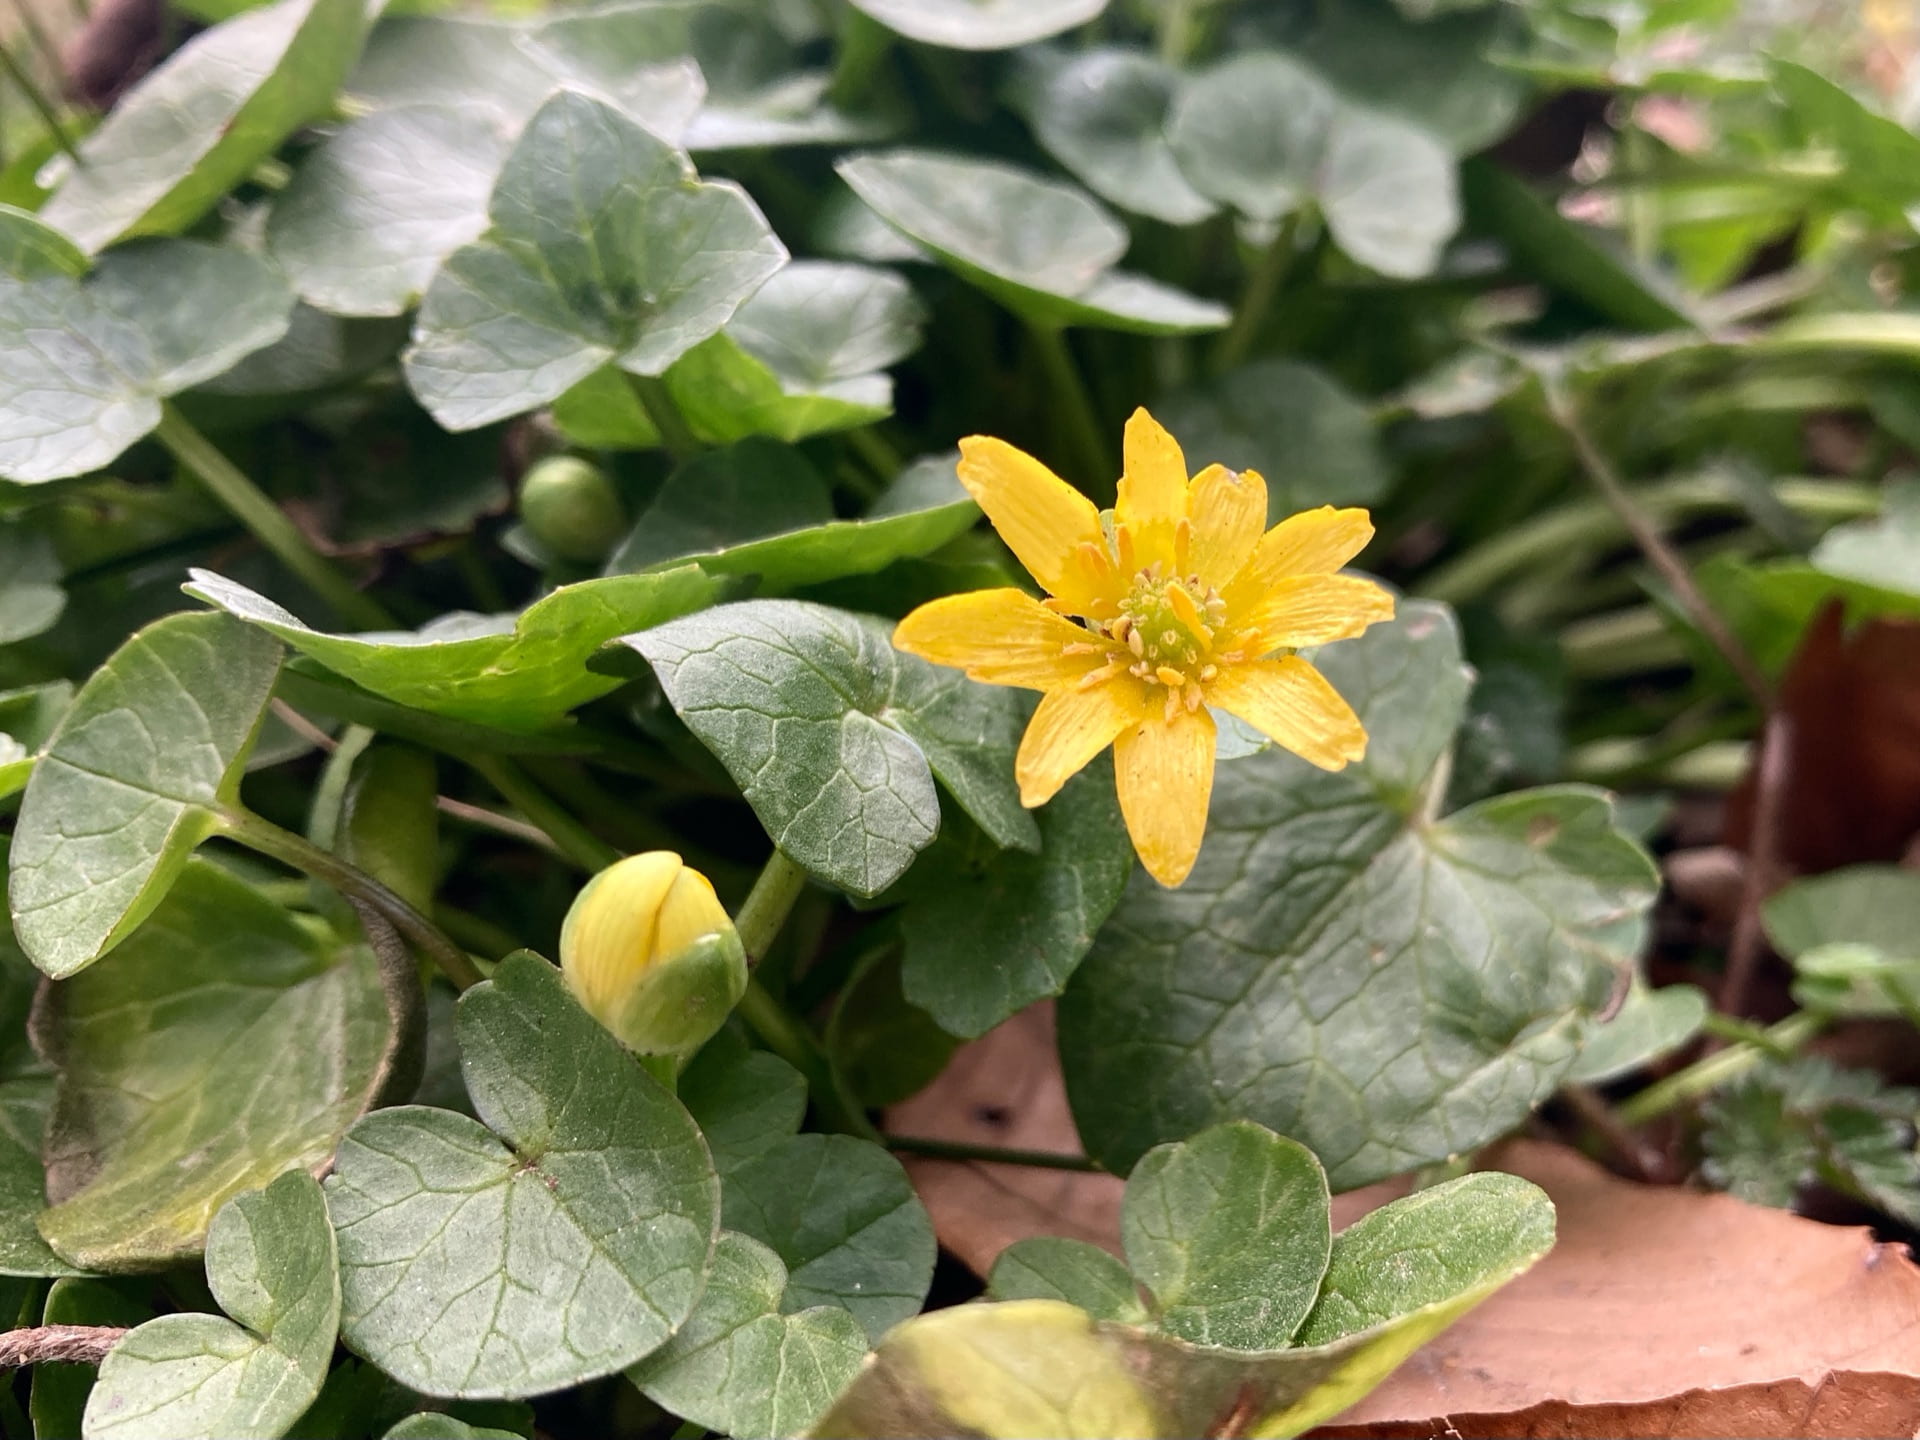 Ficaria verna, also known as lesser celandine, is a noxious introduced invasive species that, unfortunately, thrives in the moist soils of the park.